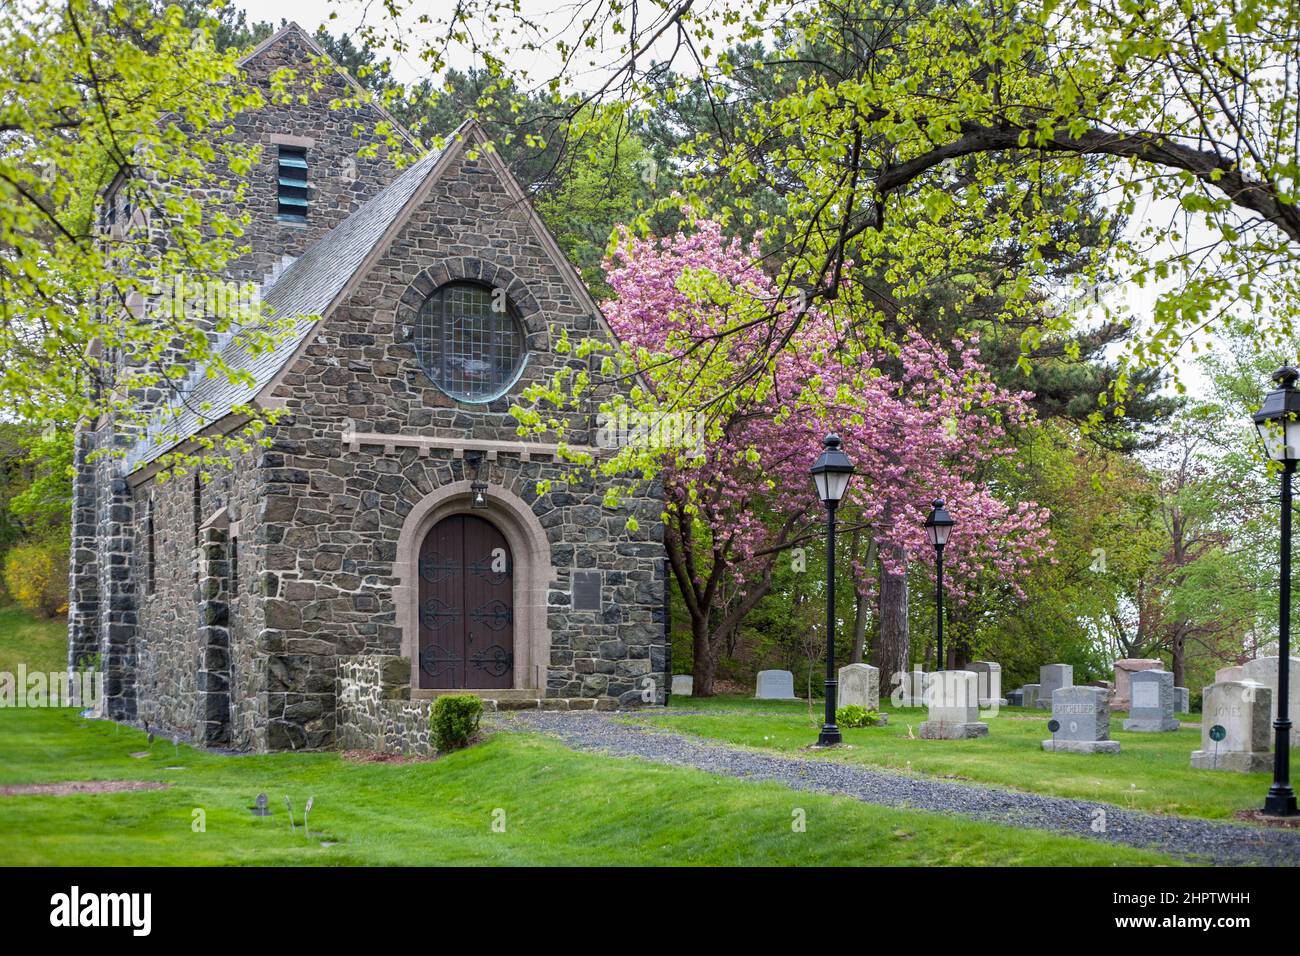 Chapel at the Greenlawn Cemetery Nahant: A quaint stone chapel surrouned by spring flowers and new leaves in the nationally listed cemetery on this small New England island. Stock Photo